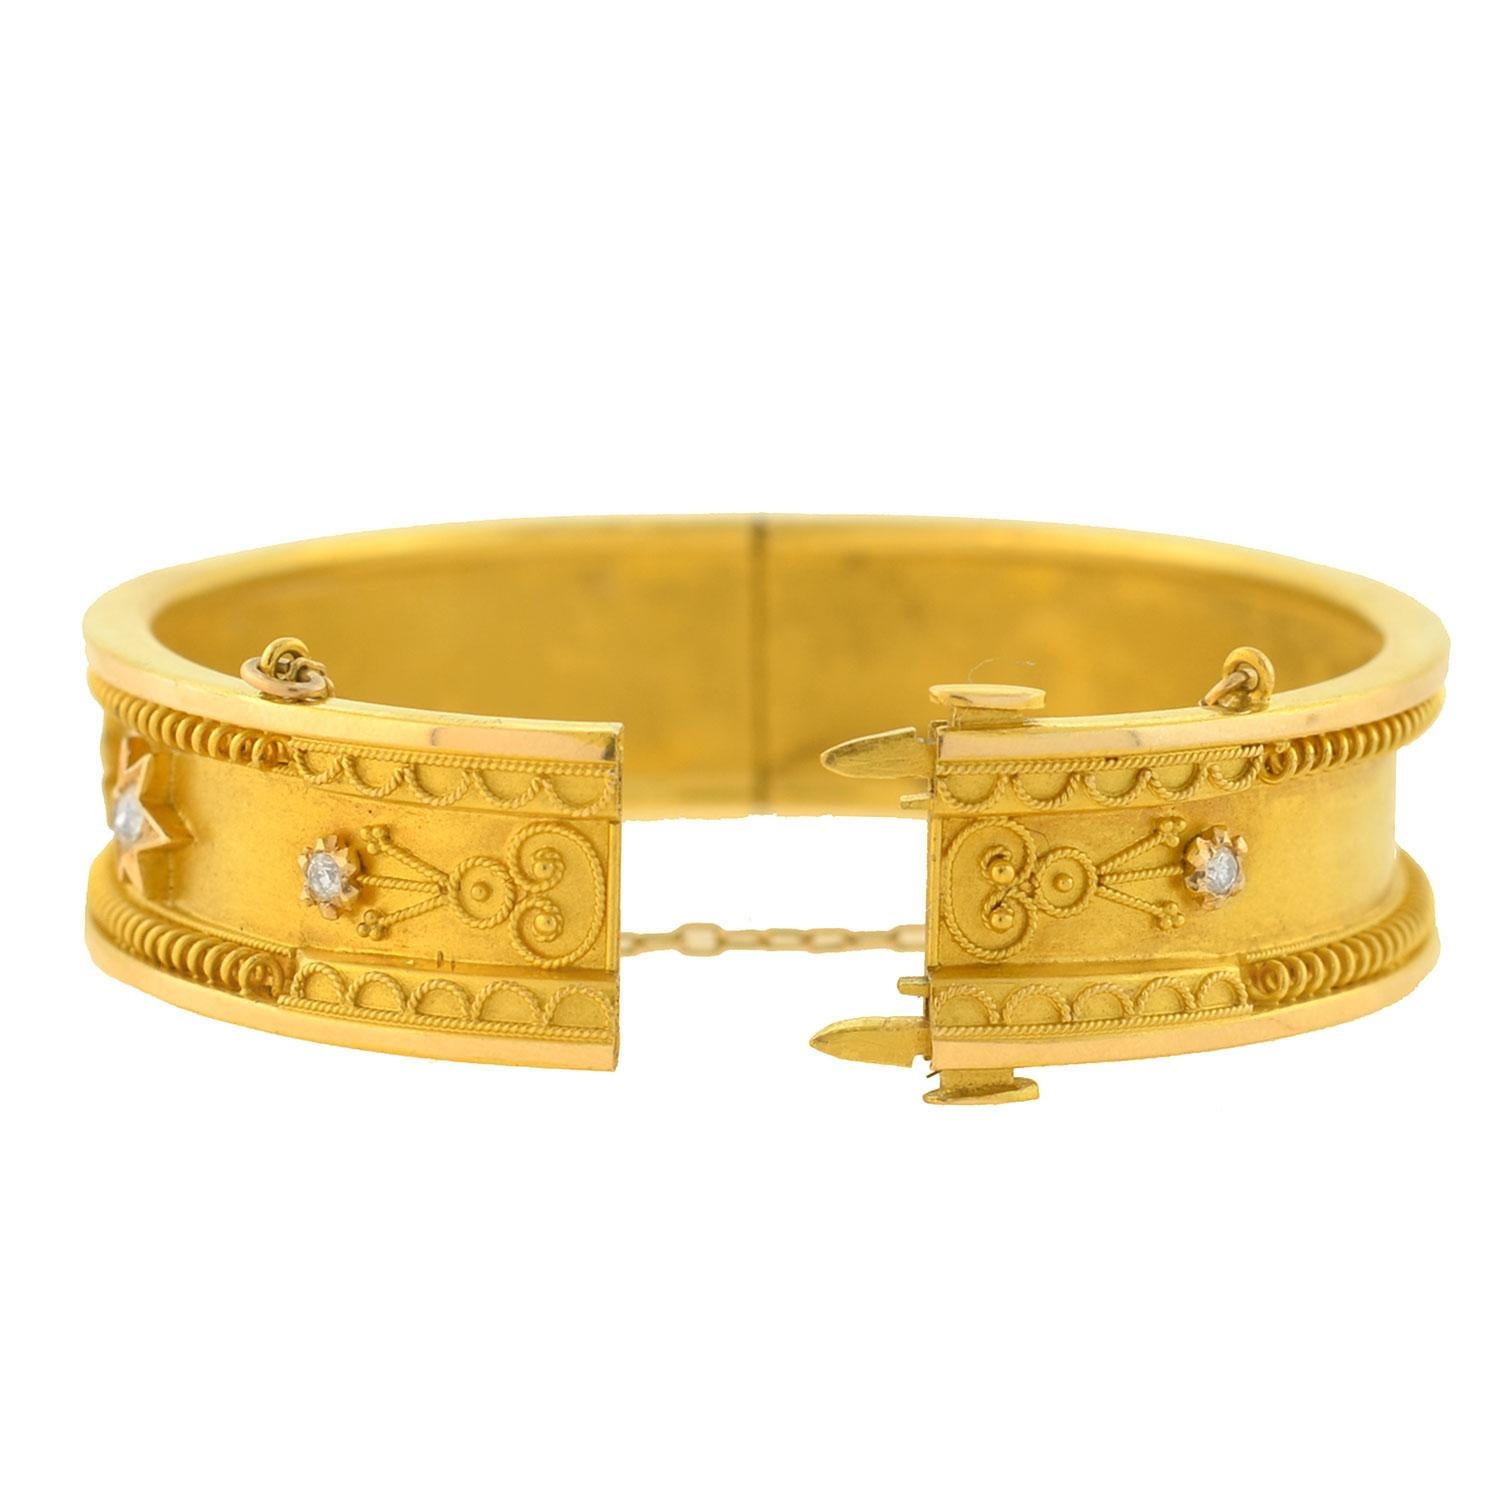 A gorgeous gold bangle bracelet from the Victorian (ca1880) era! Crafted in vibrant 18kt yellow gold, this hinged bangle has a fine coiled wirework design that borders the top and bottom edges, carrying around both sides of the piece. Soft Etruscan